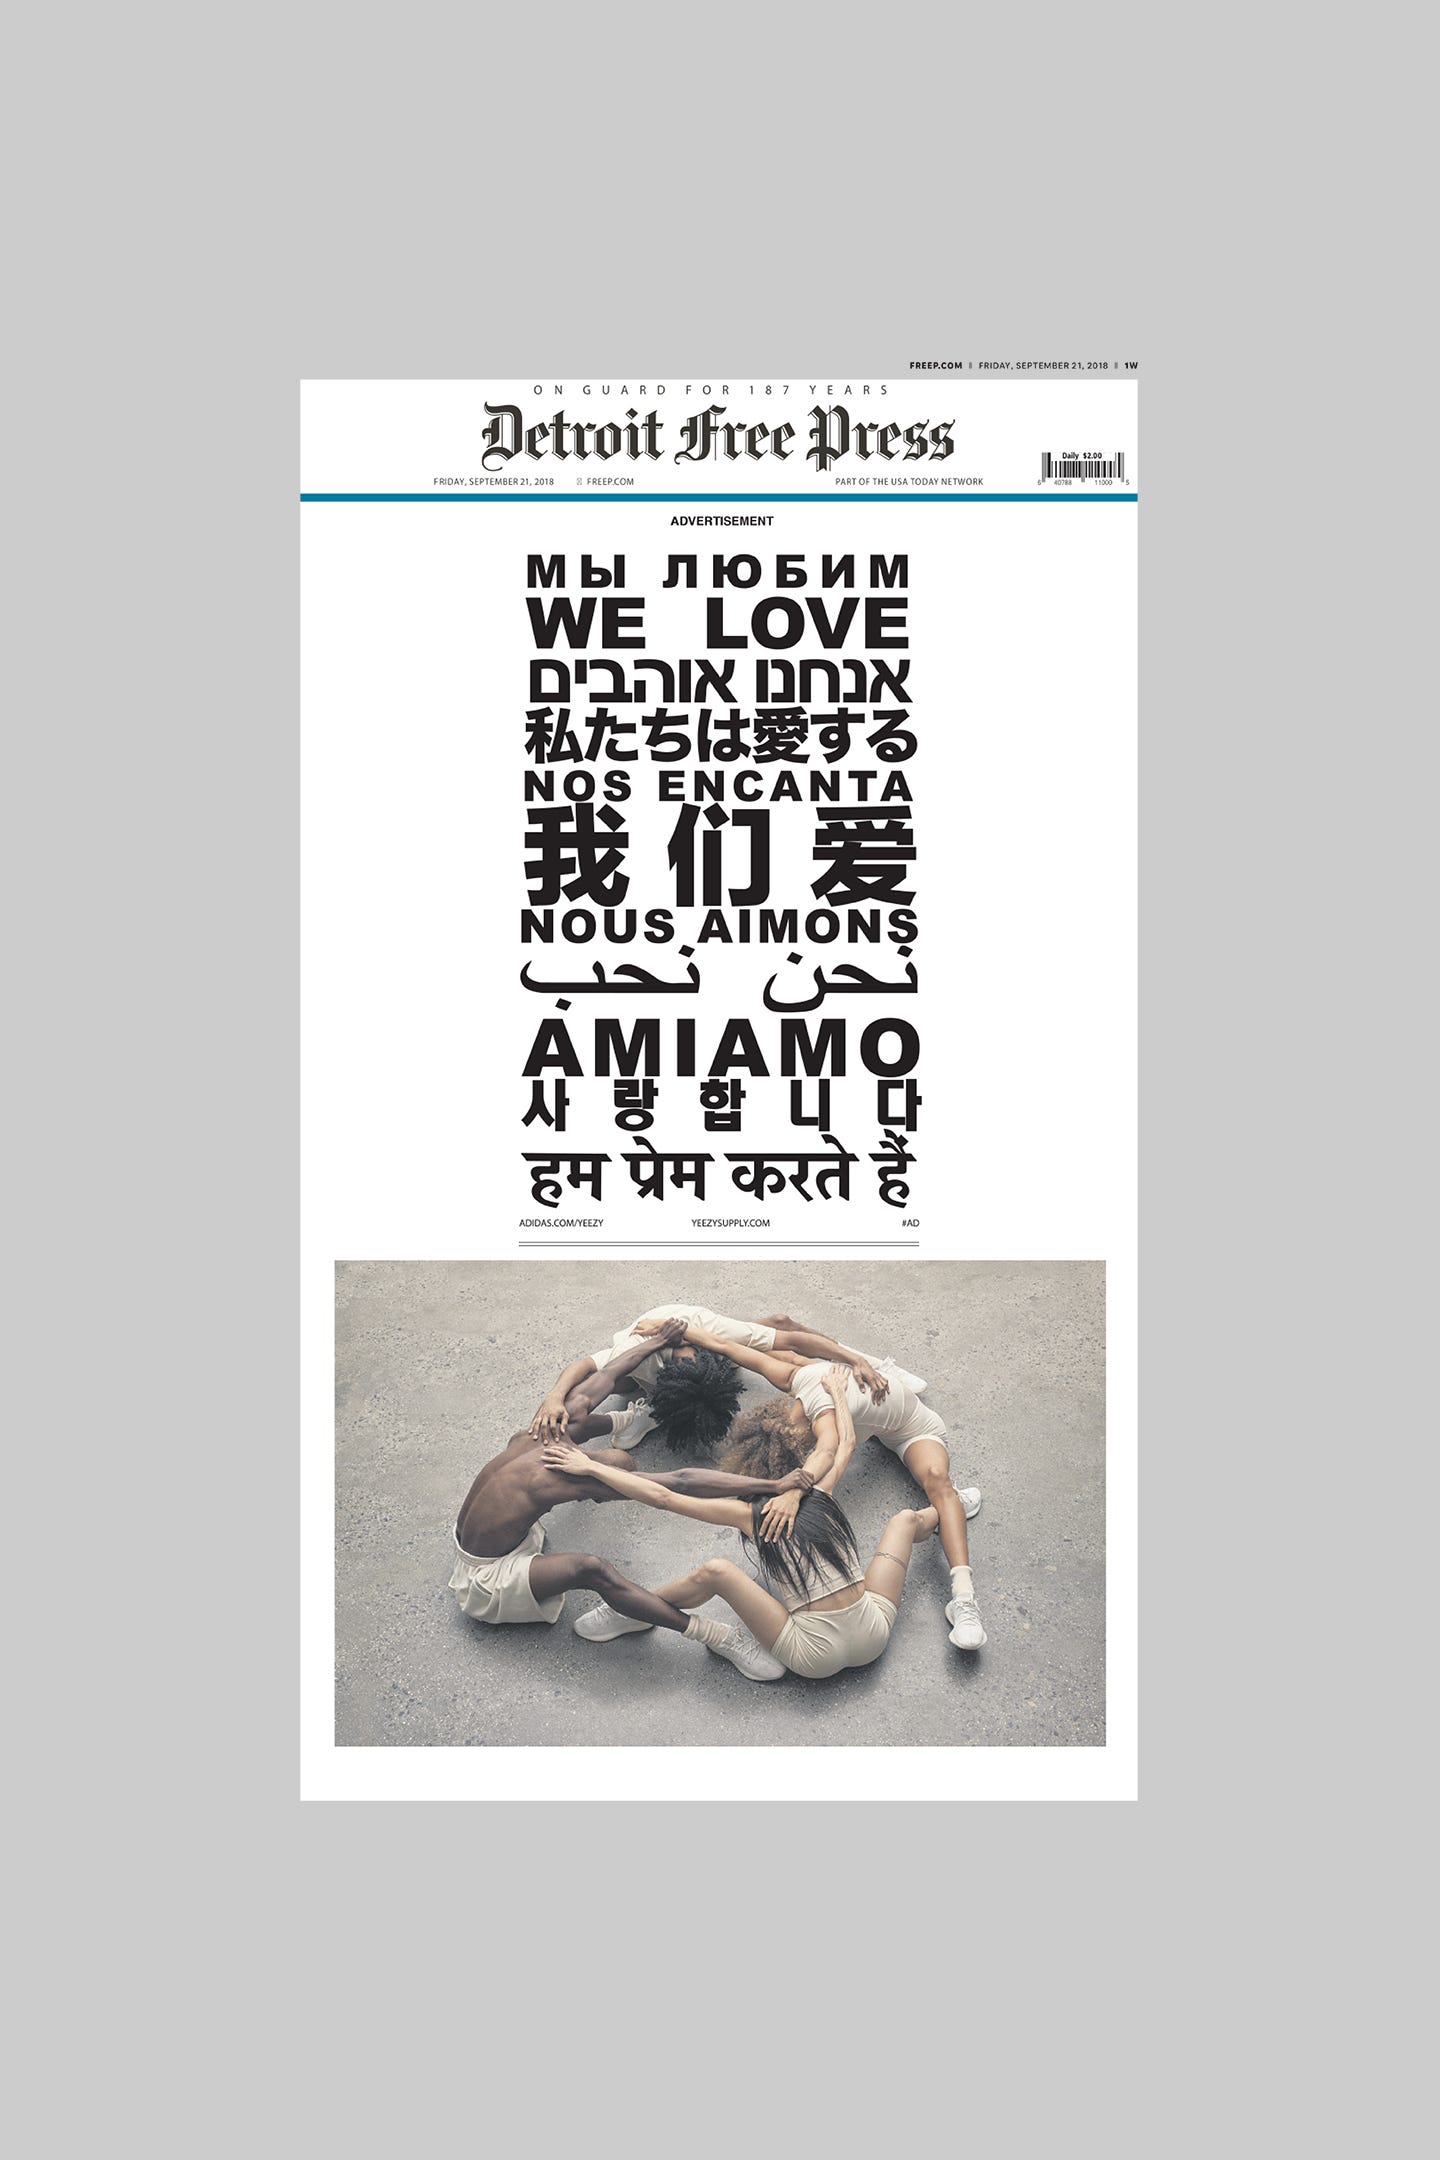 systematisk Fradrage Fatal Kanye West's Yeezy Boost ad takes over Detroit newspapers